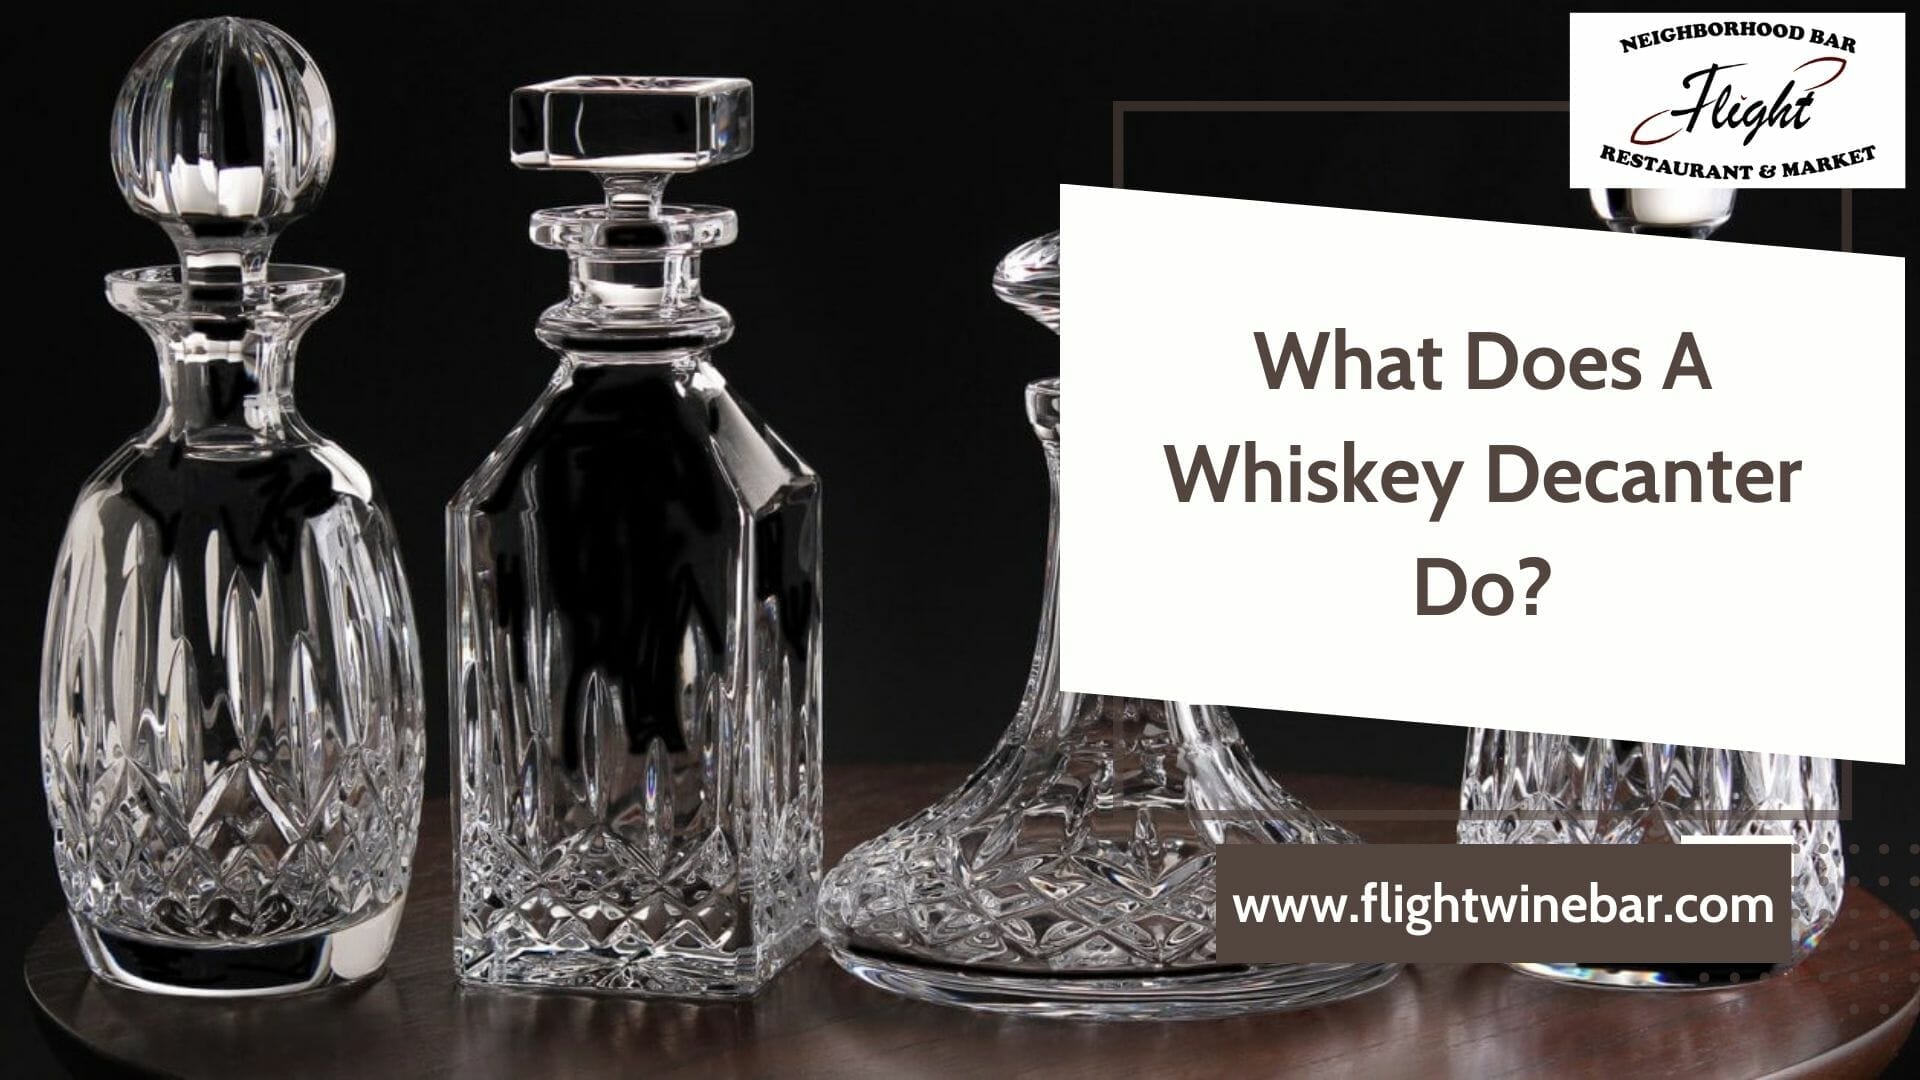 What Does A Whiskey Decanter Do